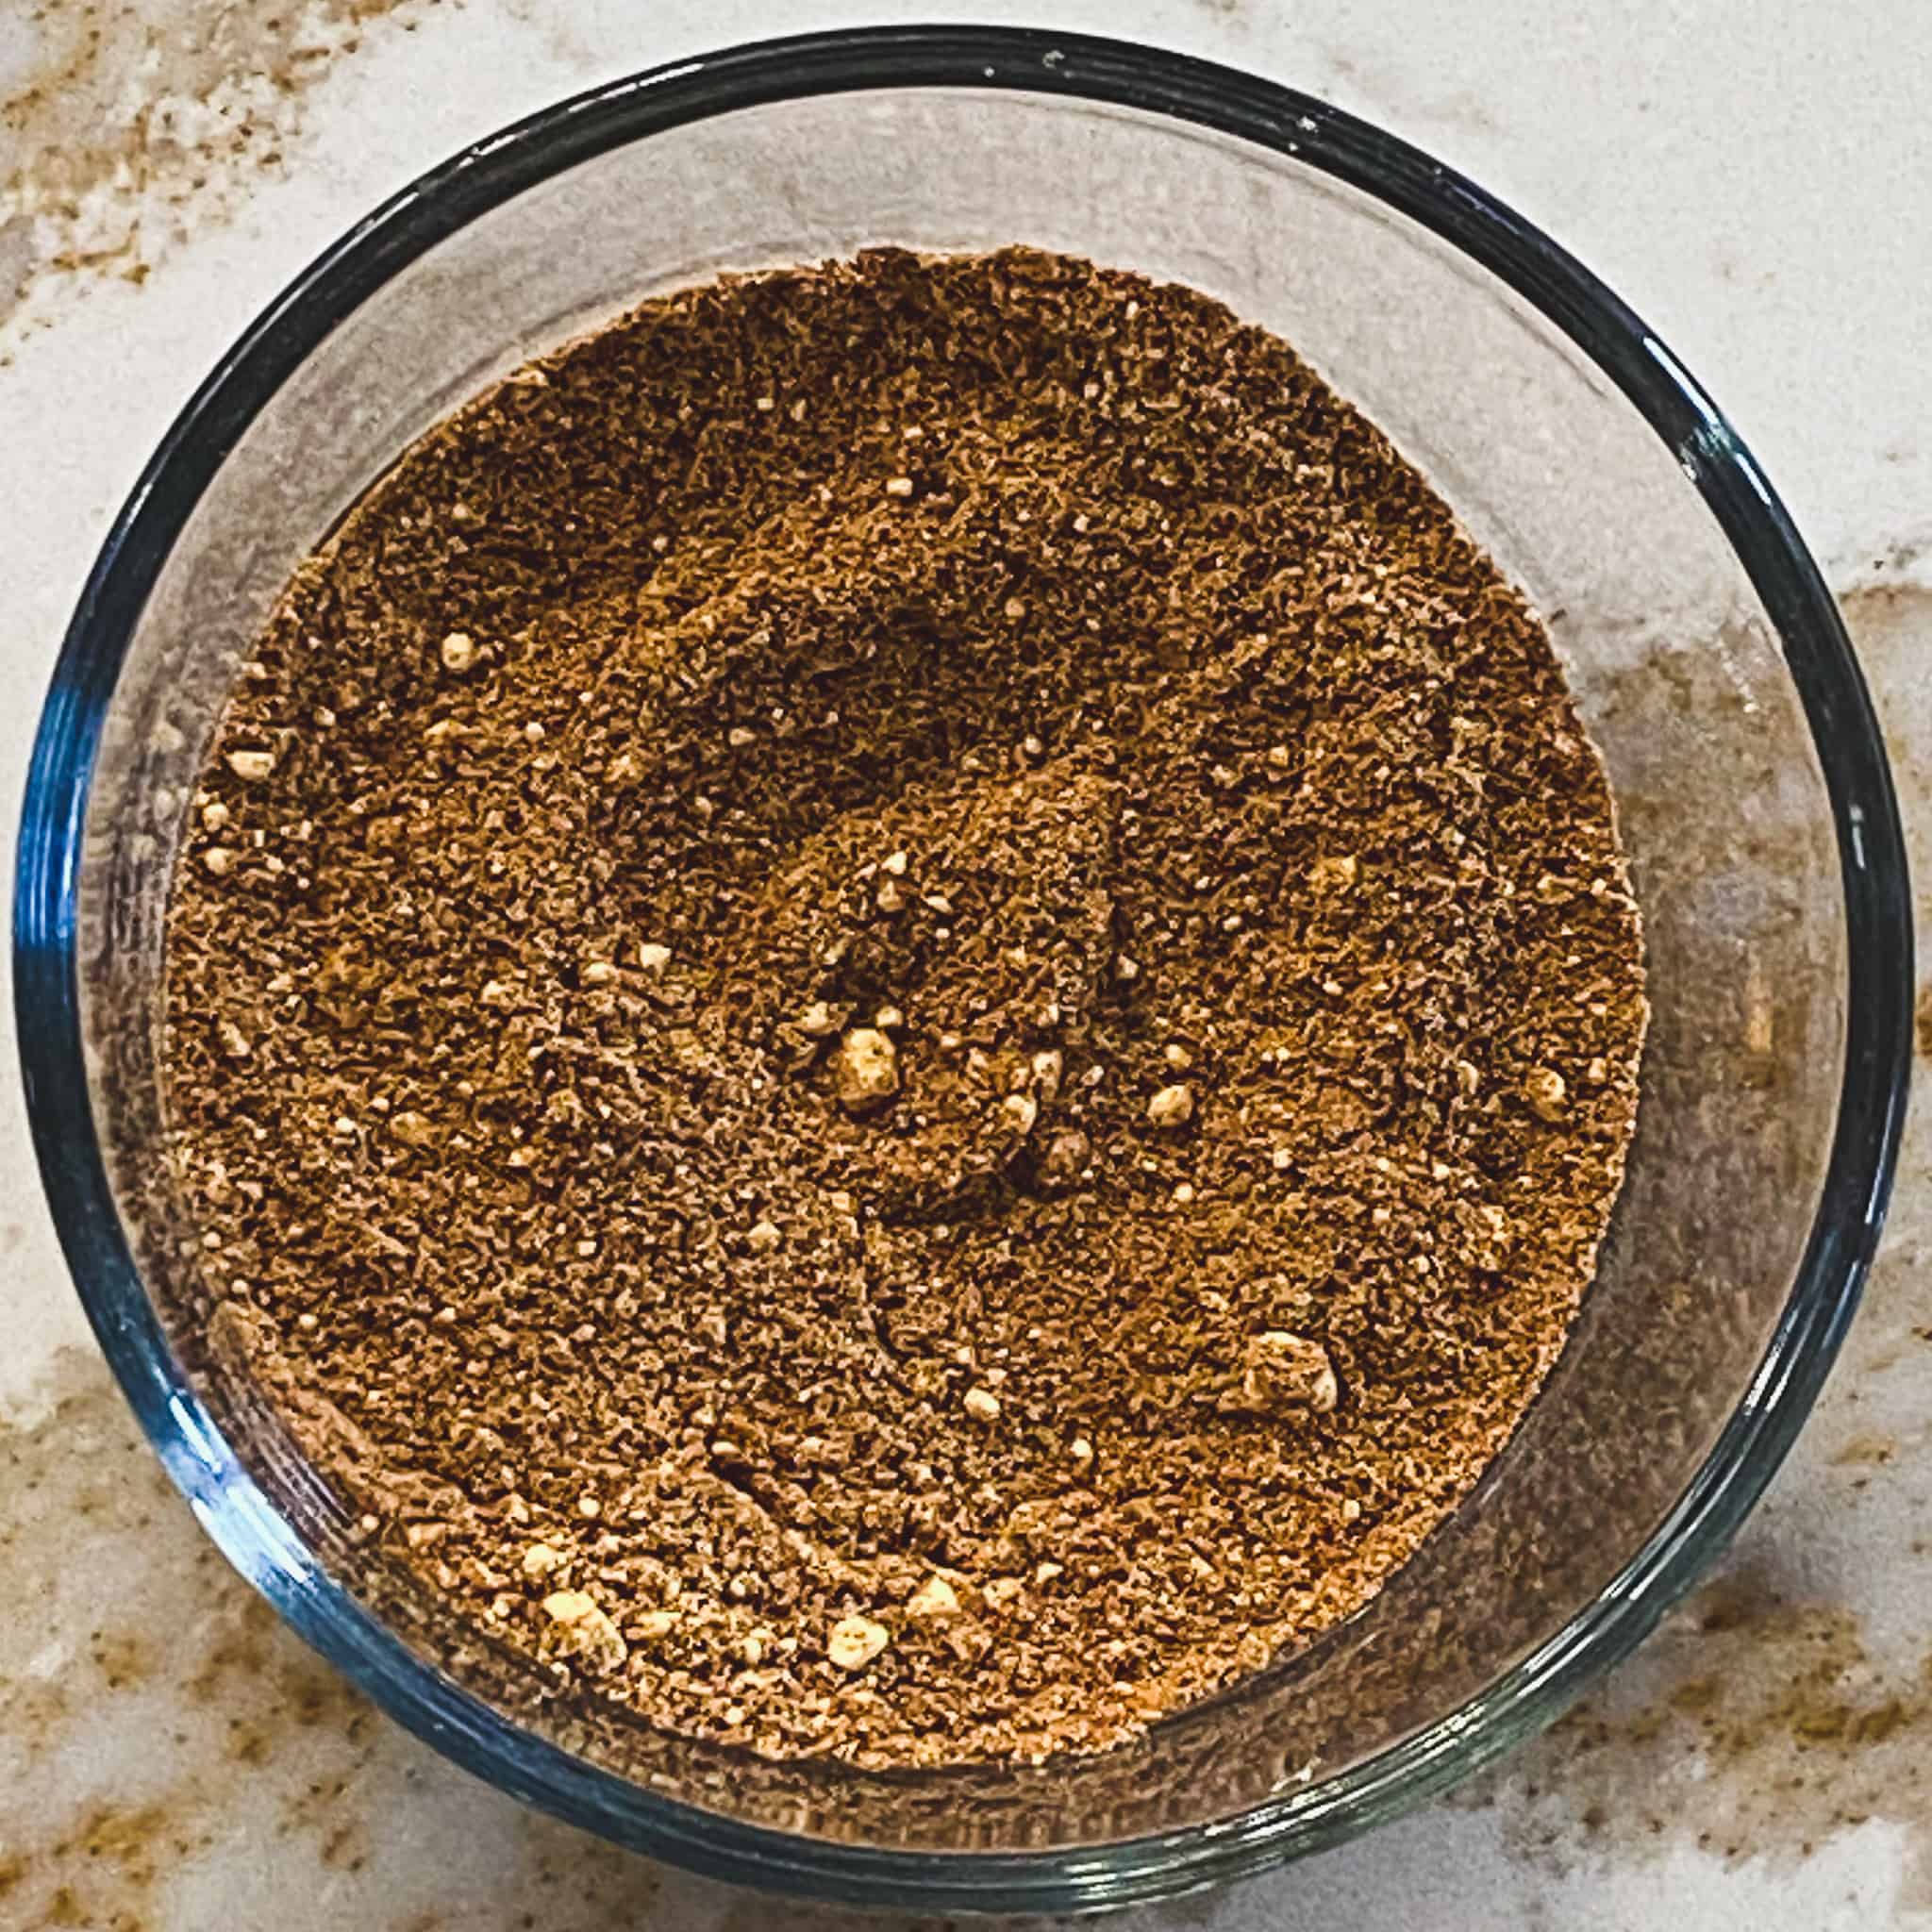 Chai spices mixed in a glass bowl.